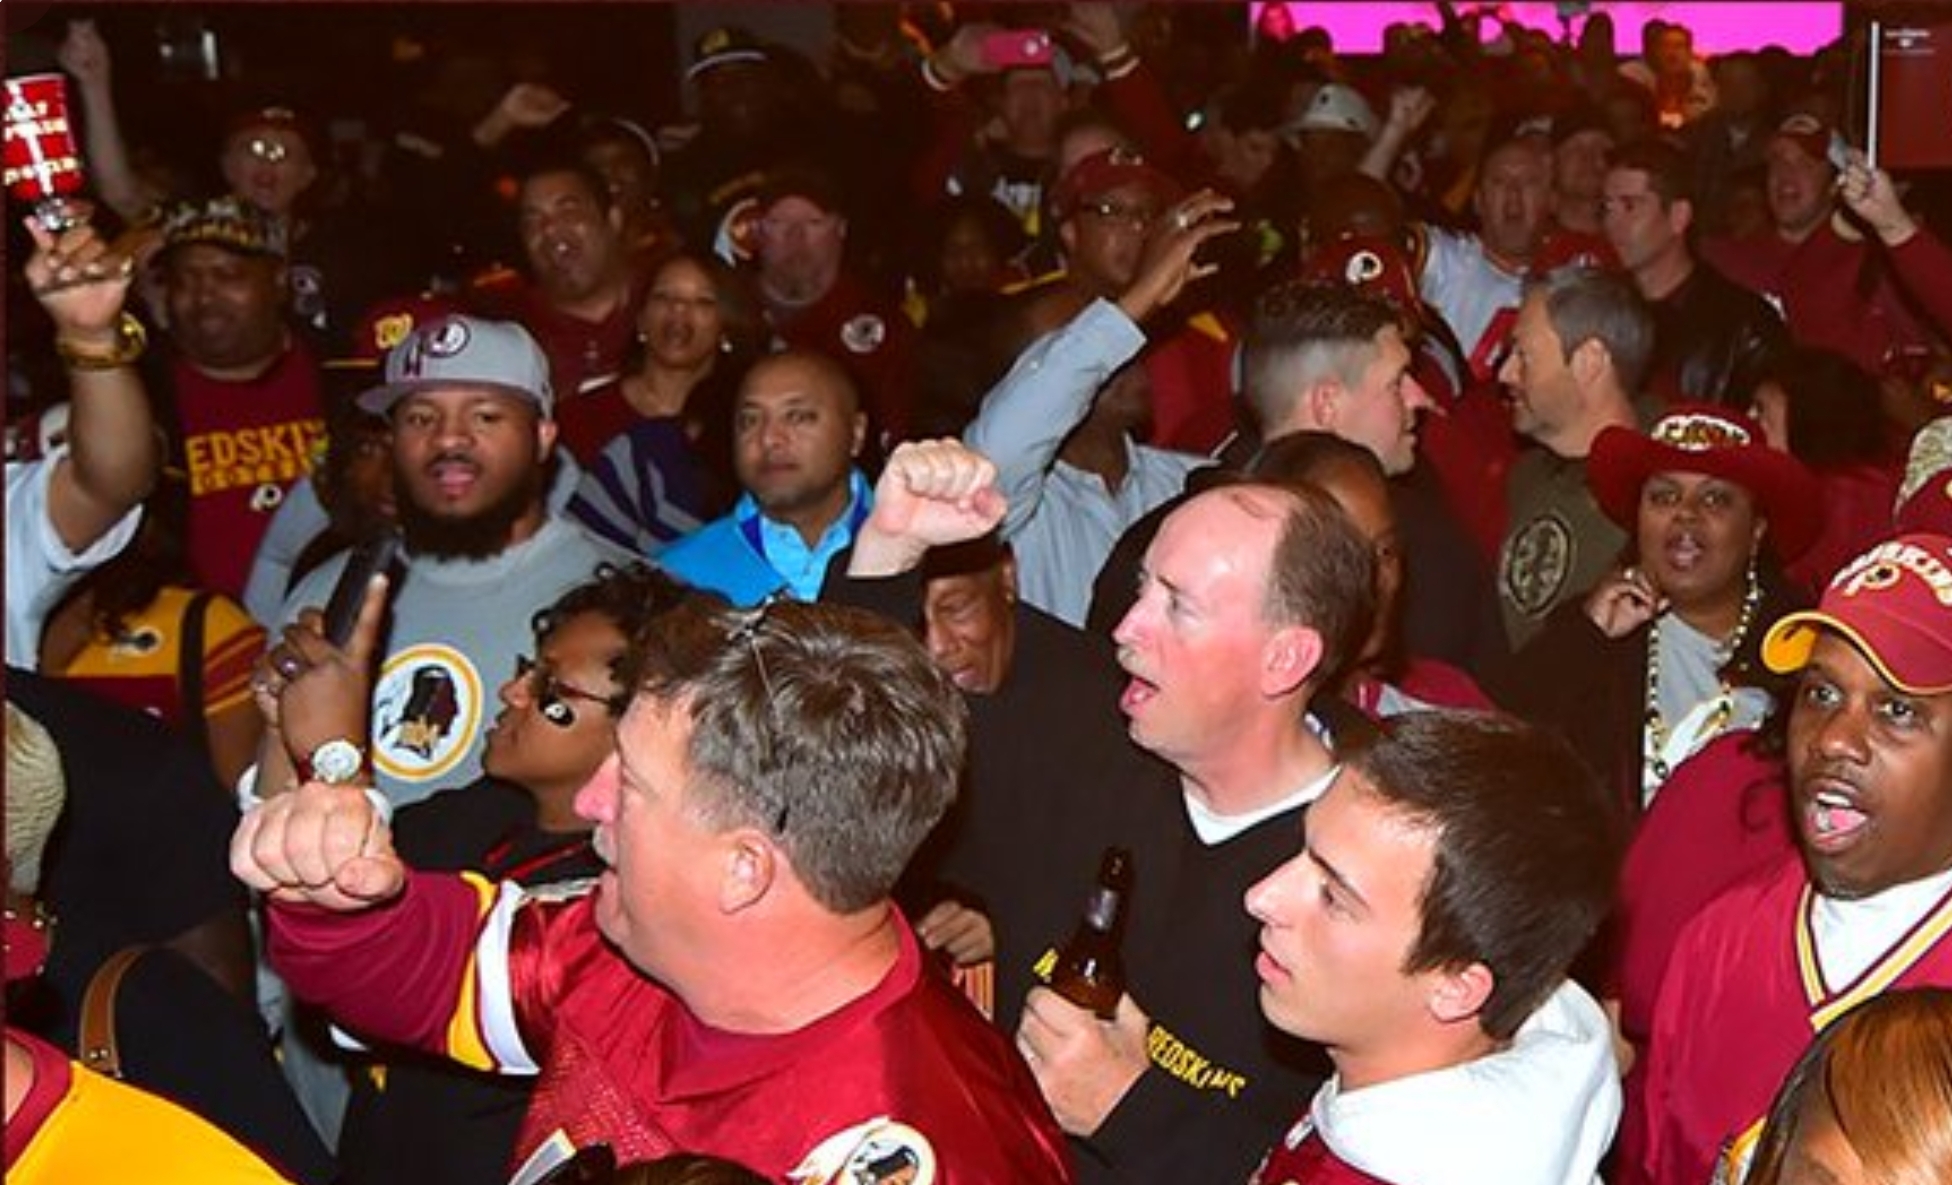 Longtime Redskins fans in North Carolina rejoicing with win over Panthers